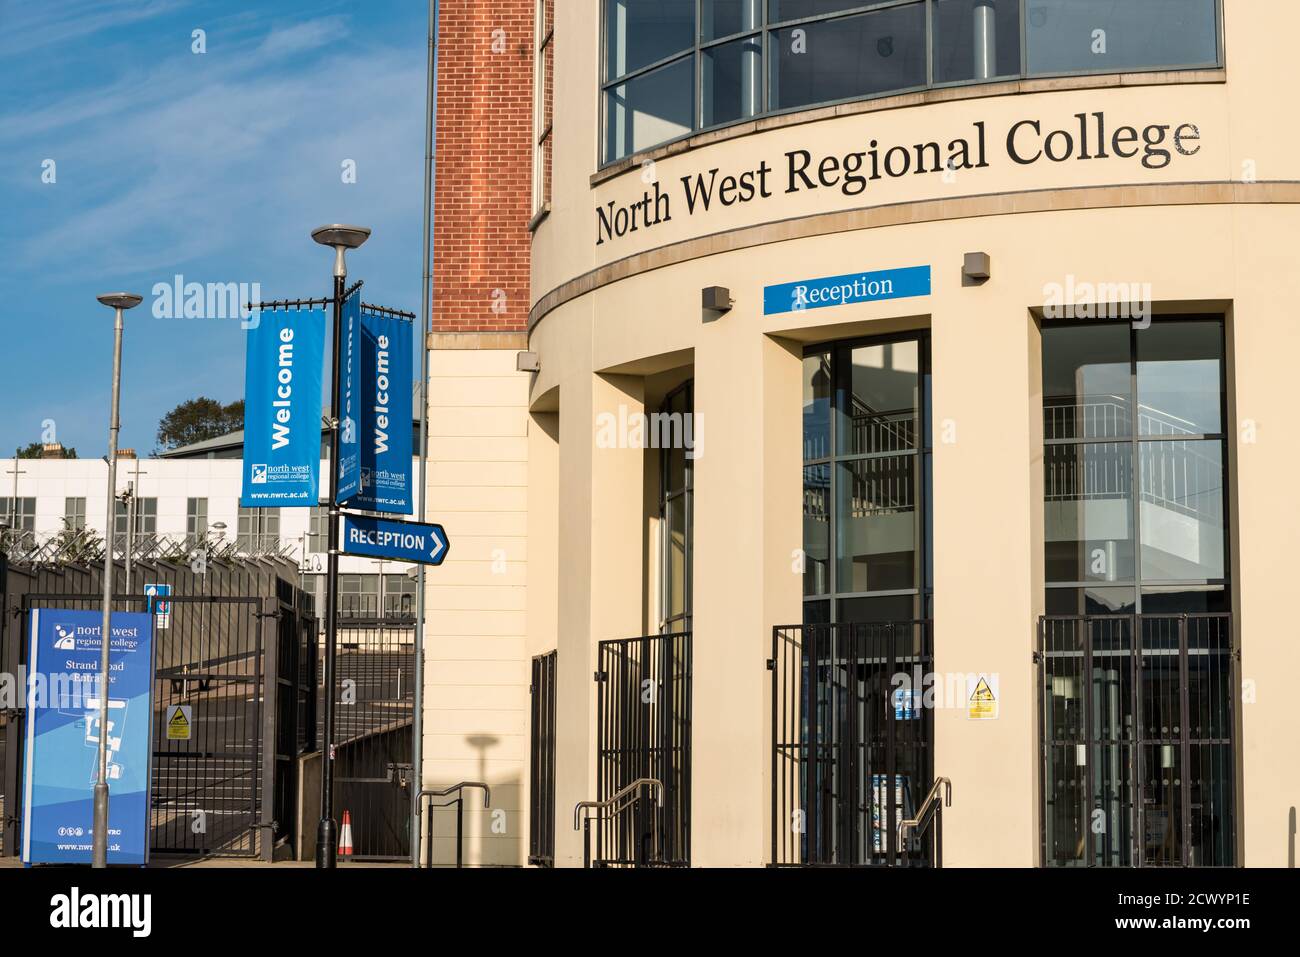 Derry, Northern Ireland- Sept 19, 2020: The front entrance and sign for the North West Regional College in Derry Northern Ireland. Stock Photo